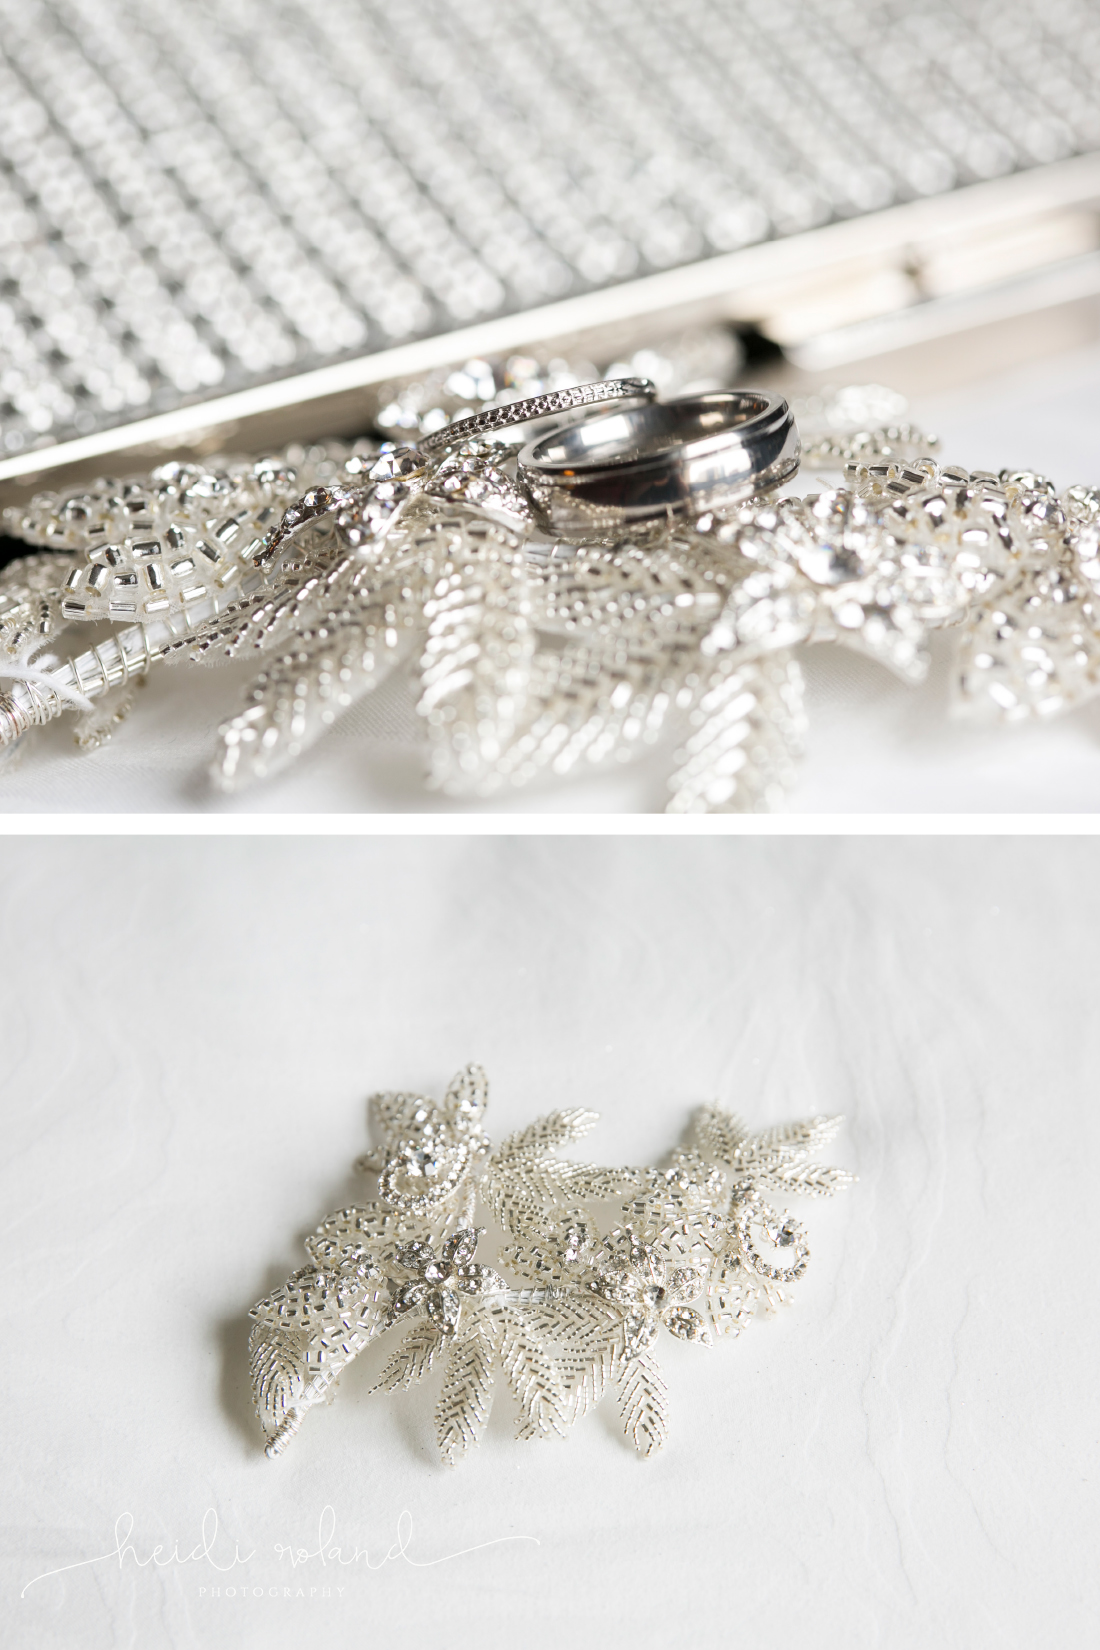 Bride's sparkly wedding details, rings, hairpiece, clutch